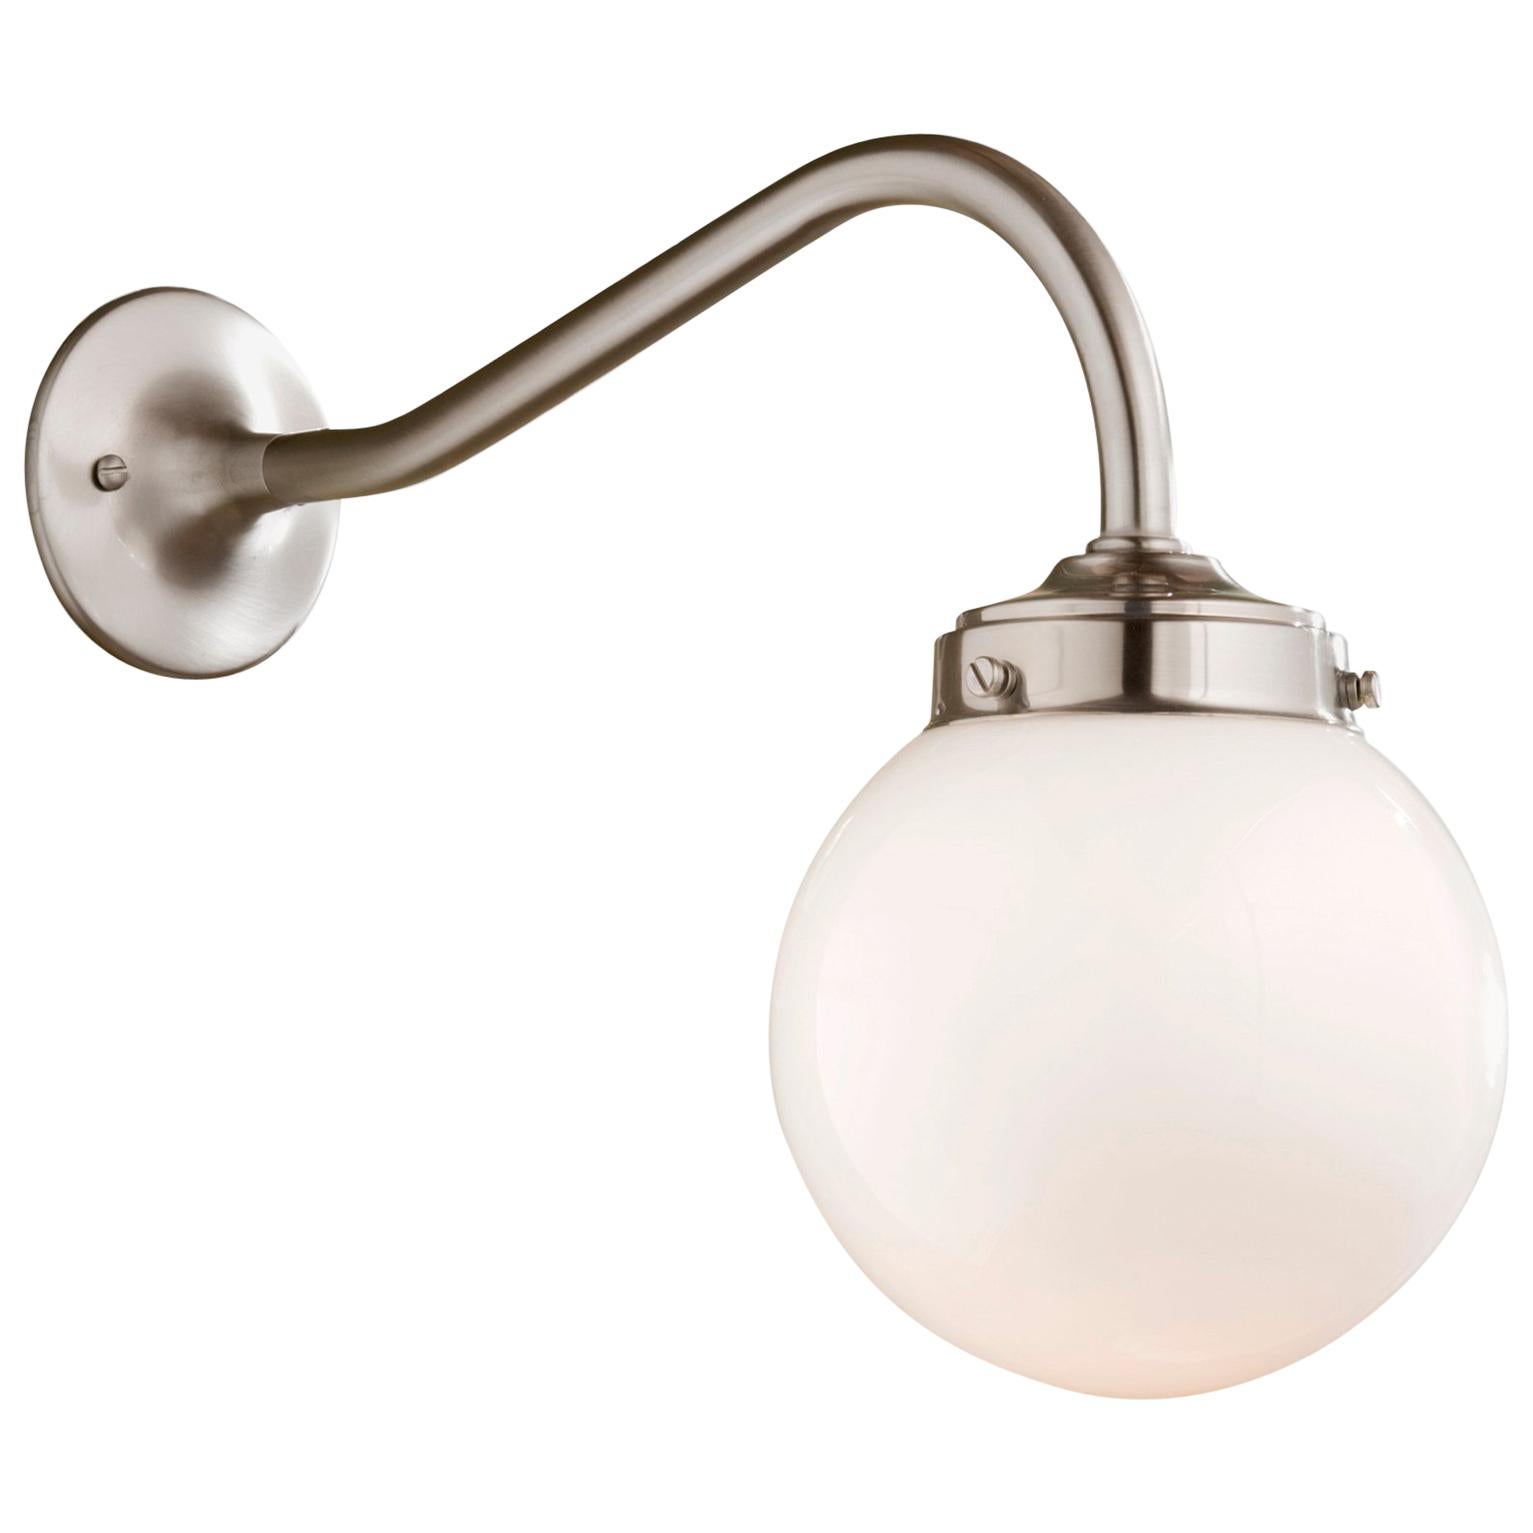 Tekna Clovelly Wall Light with Brushed Nickel Finish For Sale